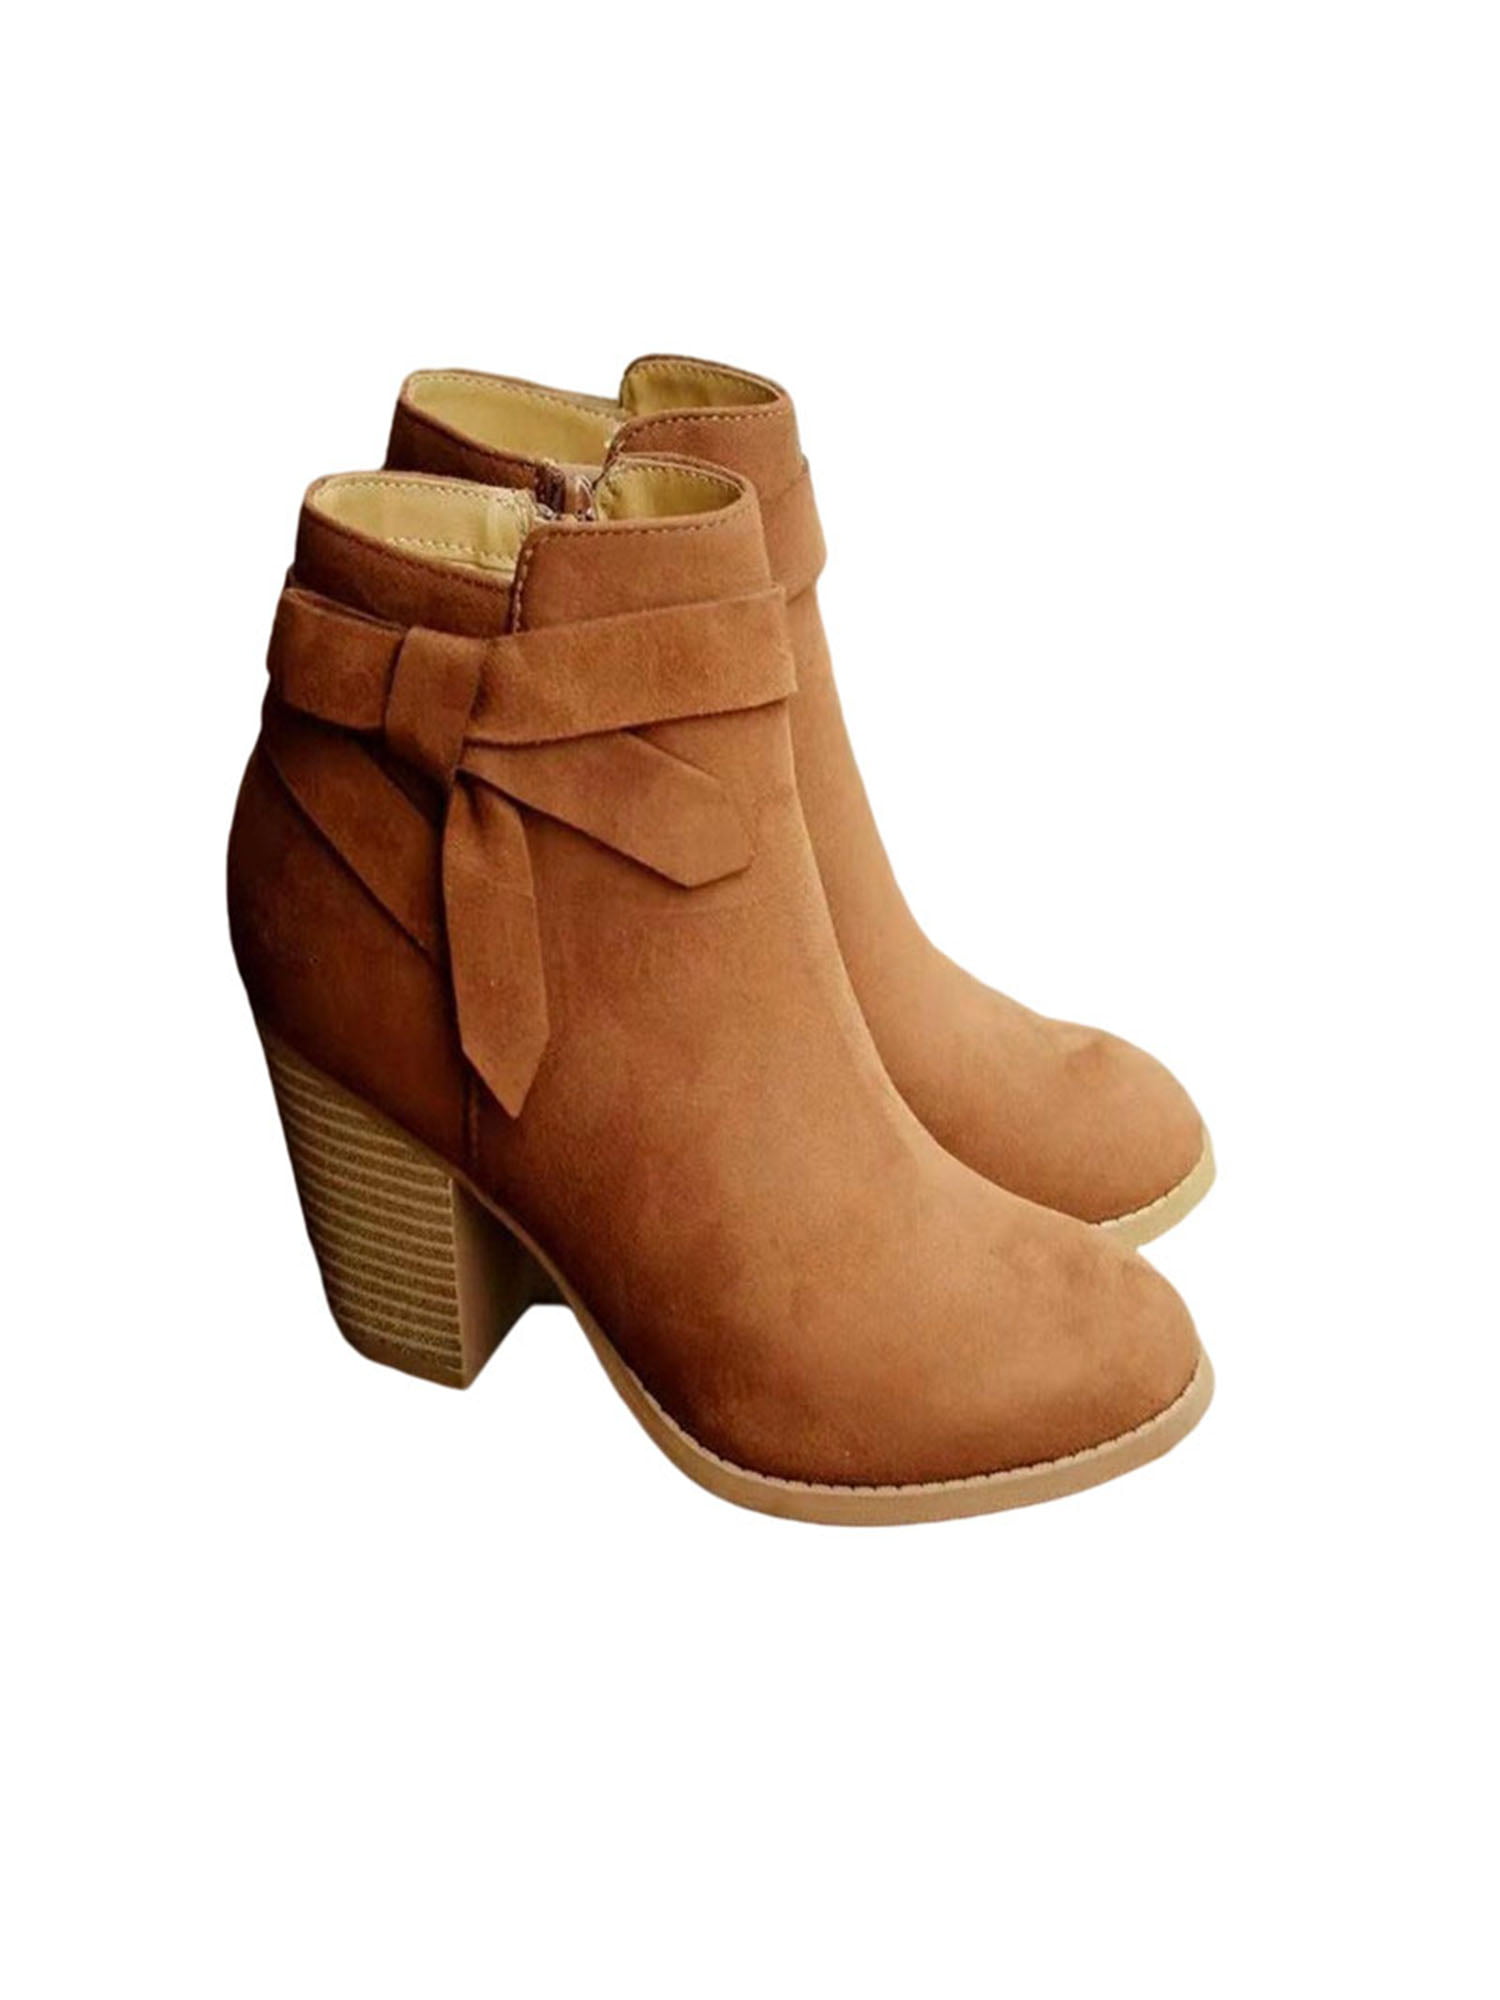 Women Plain Mid/Low Heels Retro Ankle Boots Chunky Chelsea Booties Shoes Autumn